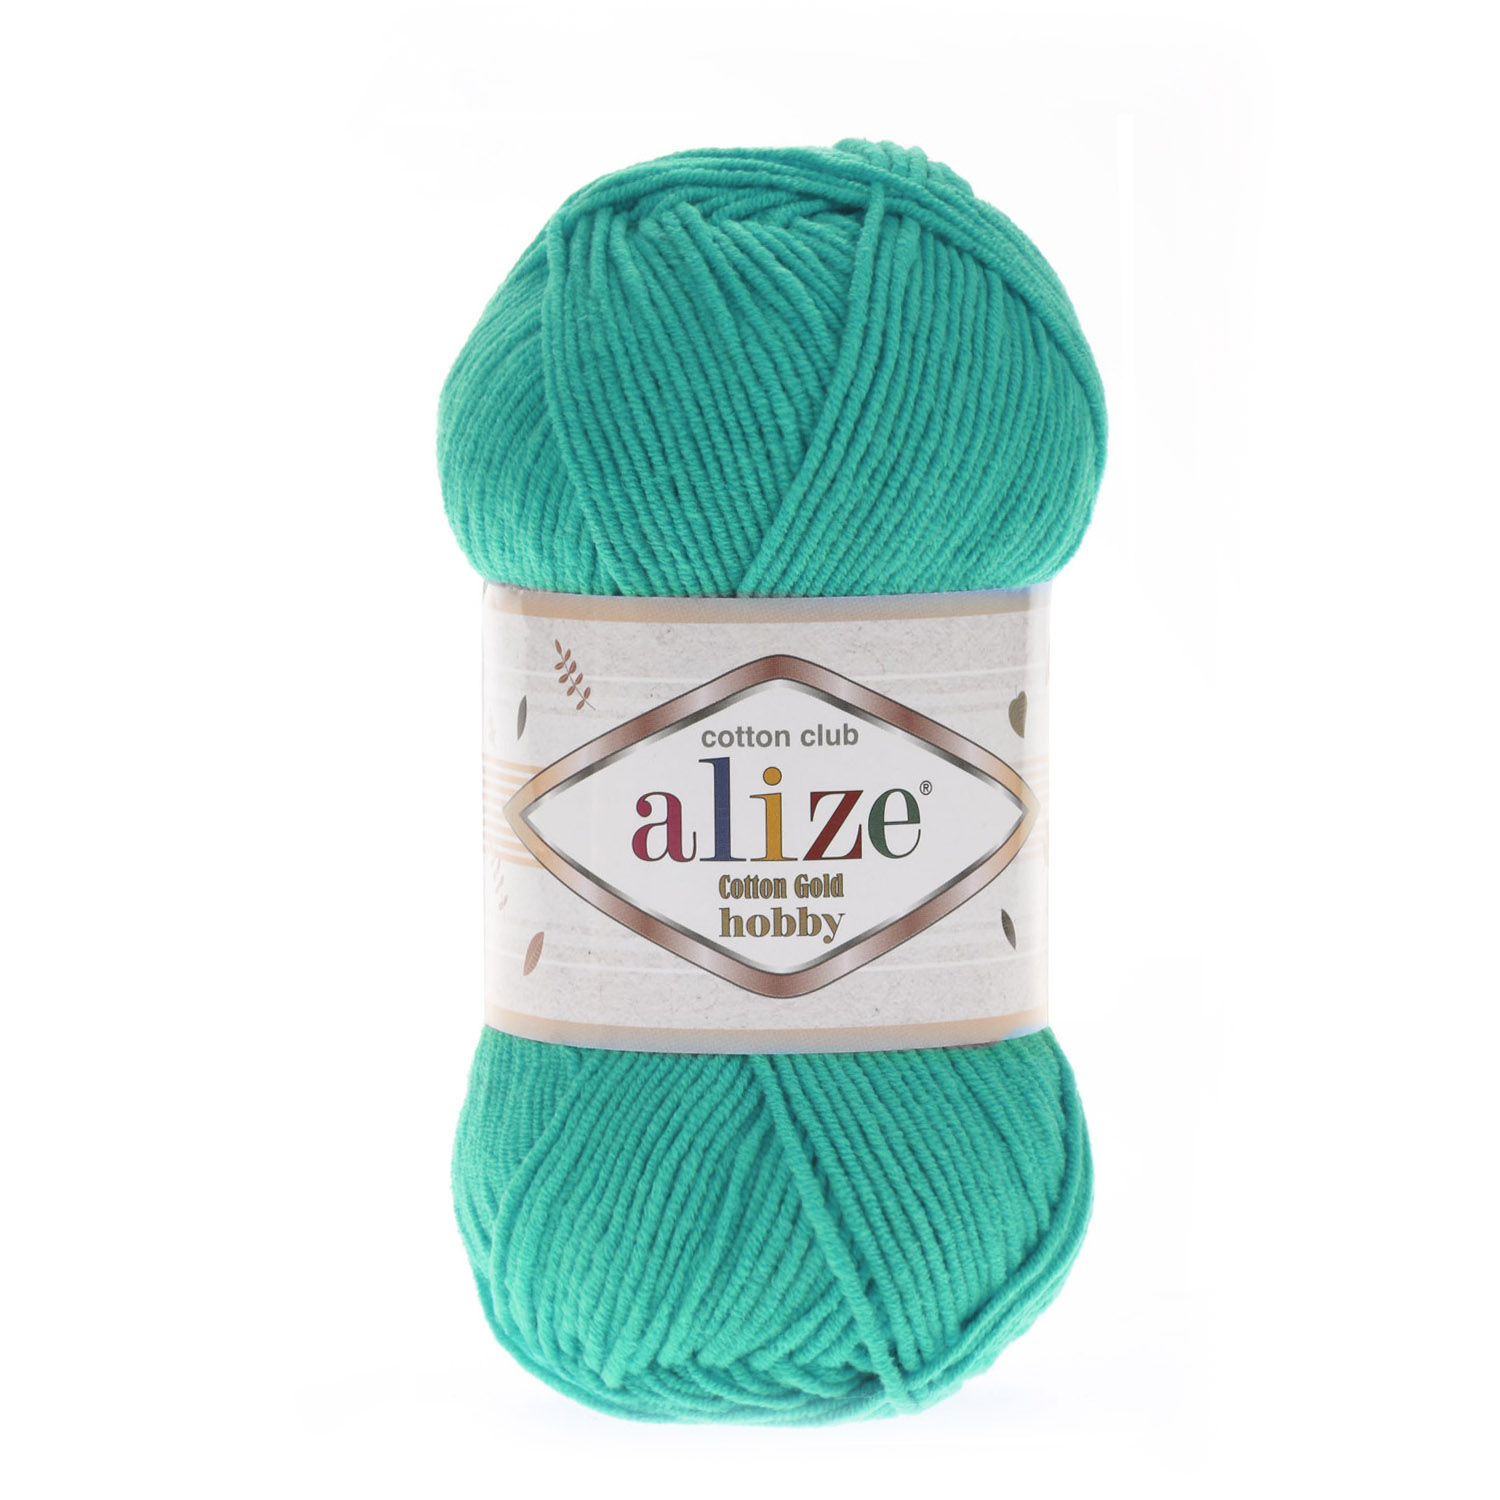 Buy ALIZE COTTON GOLD HOBBY From ALIZE Online